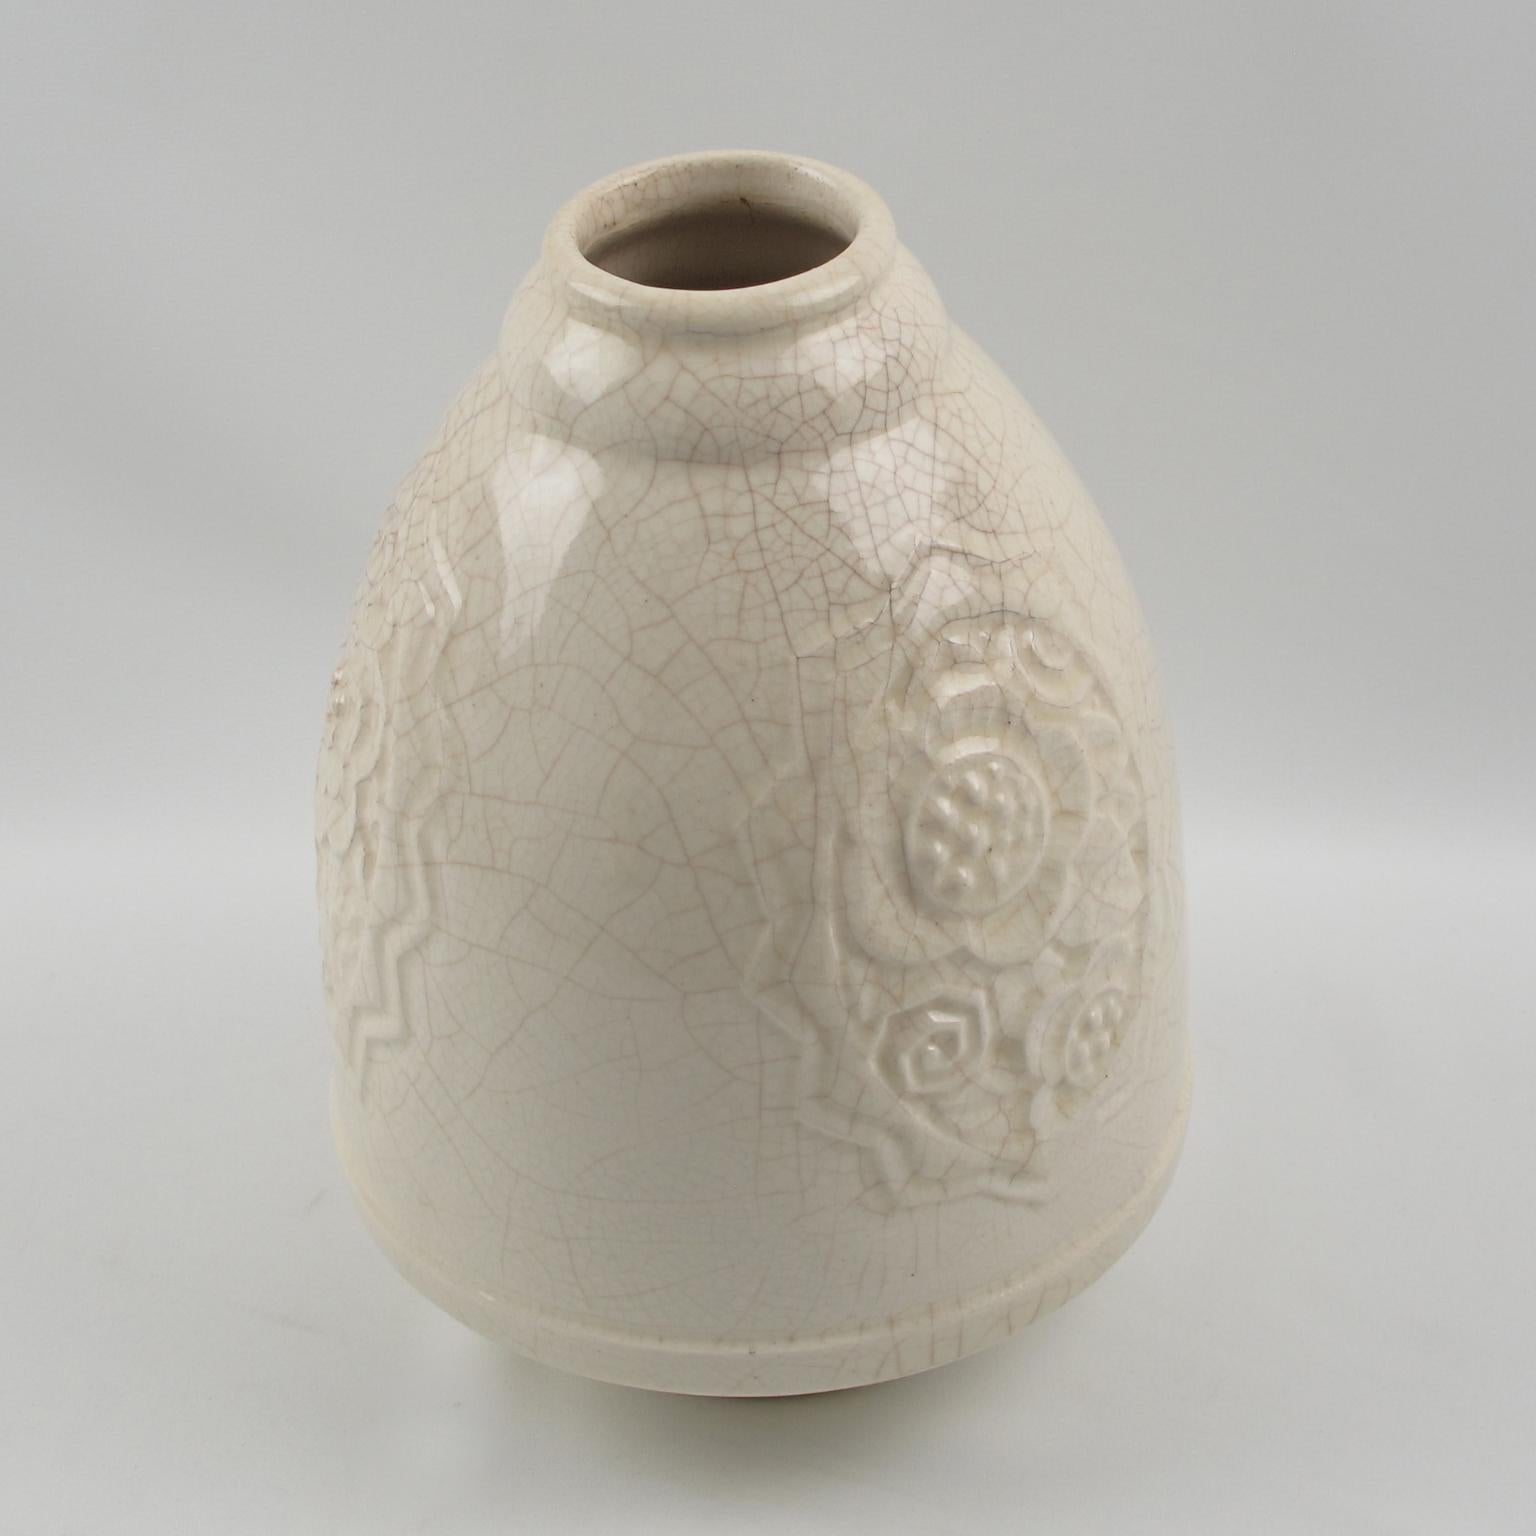 Elegant Art Deco vase by Saint Clement, France. French ceramic vase with off-white crackle glaze finish. Features a large squash puffy shape with small collar opening and detailed carved stylized floral design all around (three design around vase).